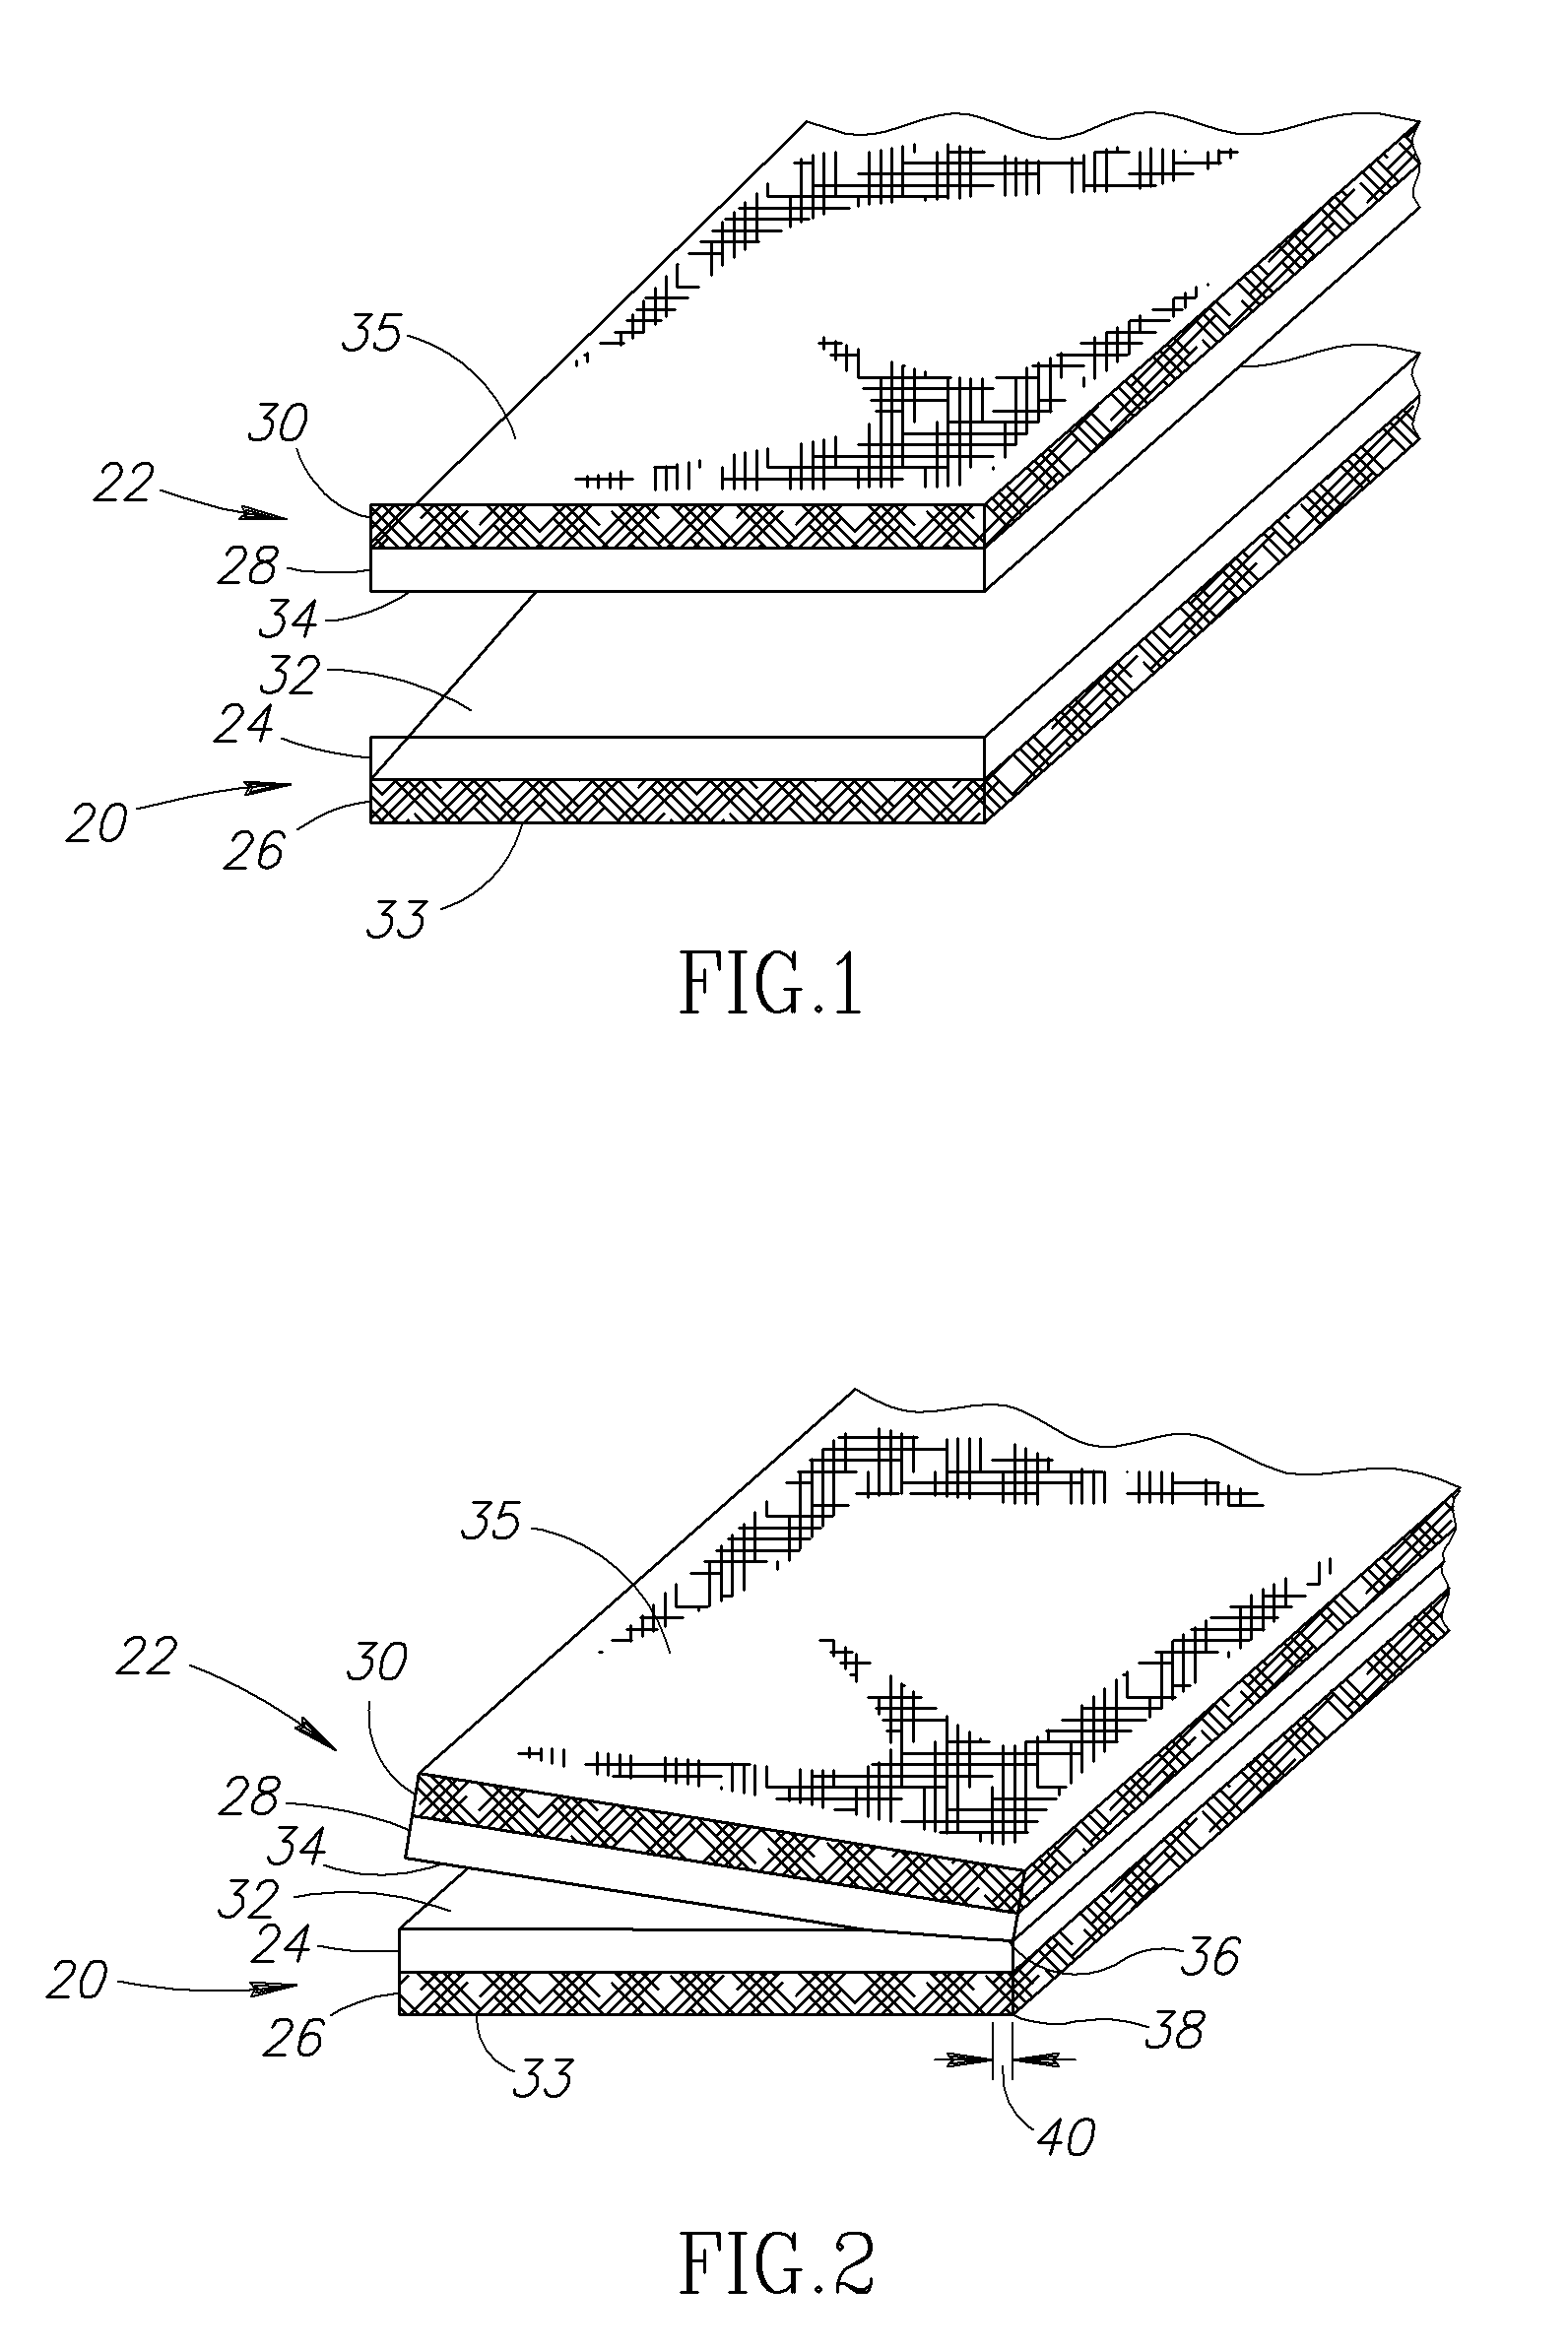 Fabric joining method and system